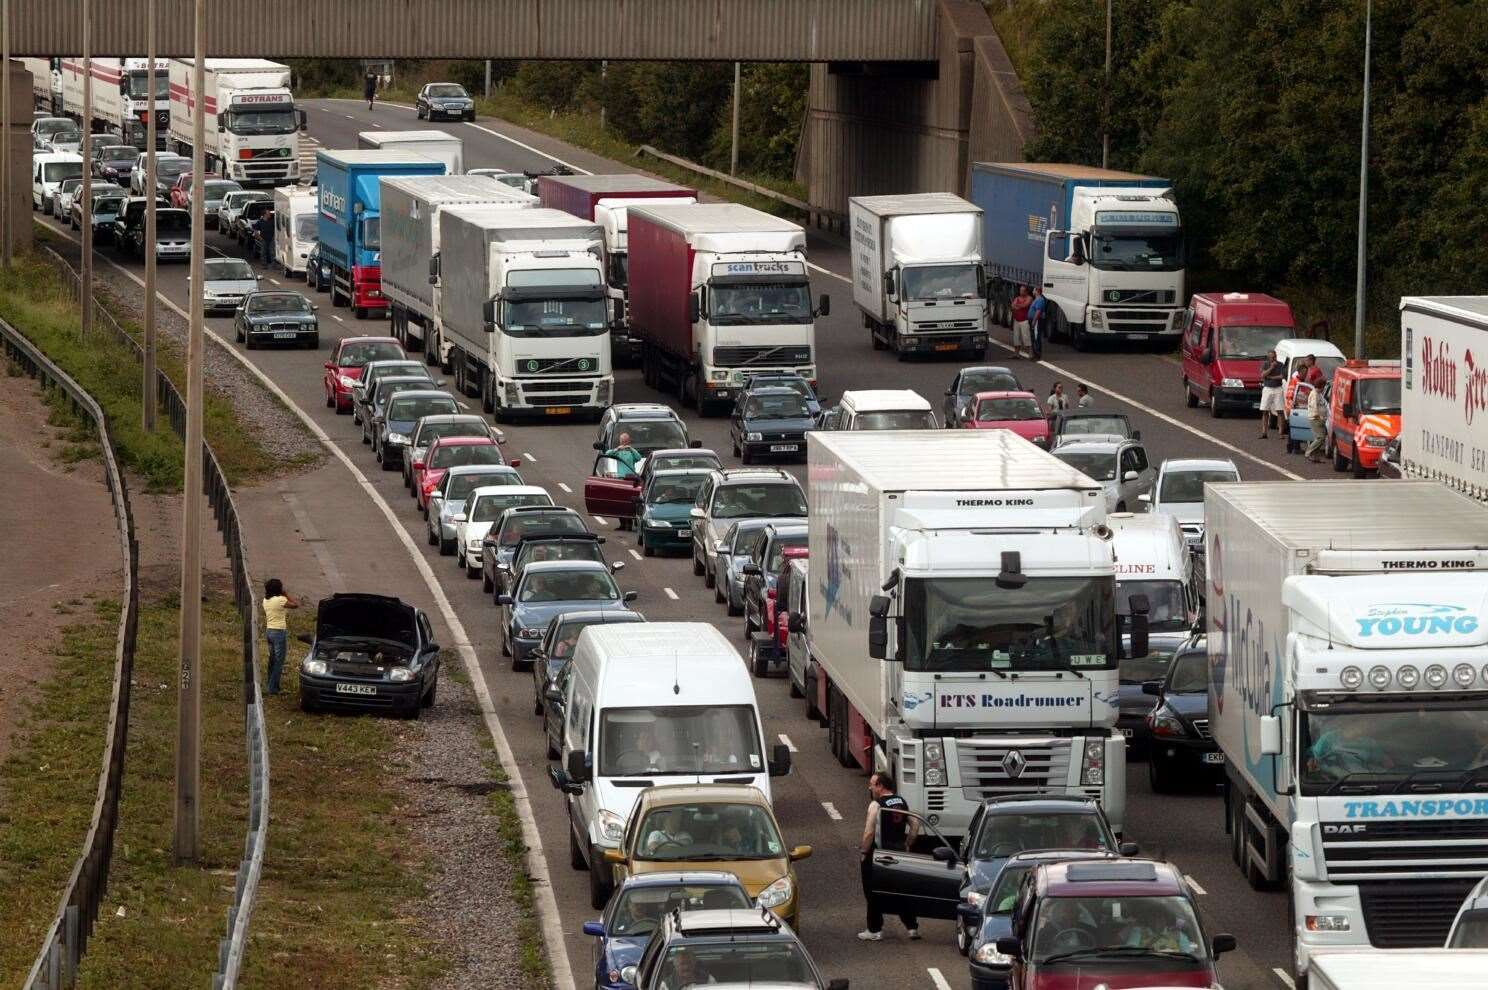 Expect more M25 delays